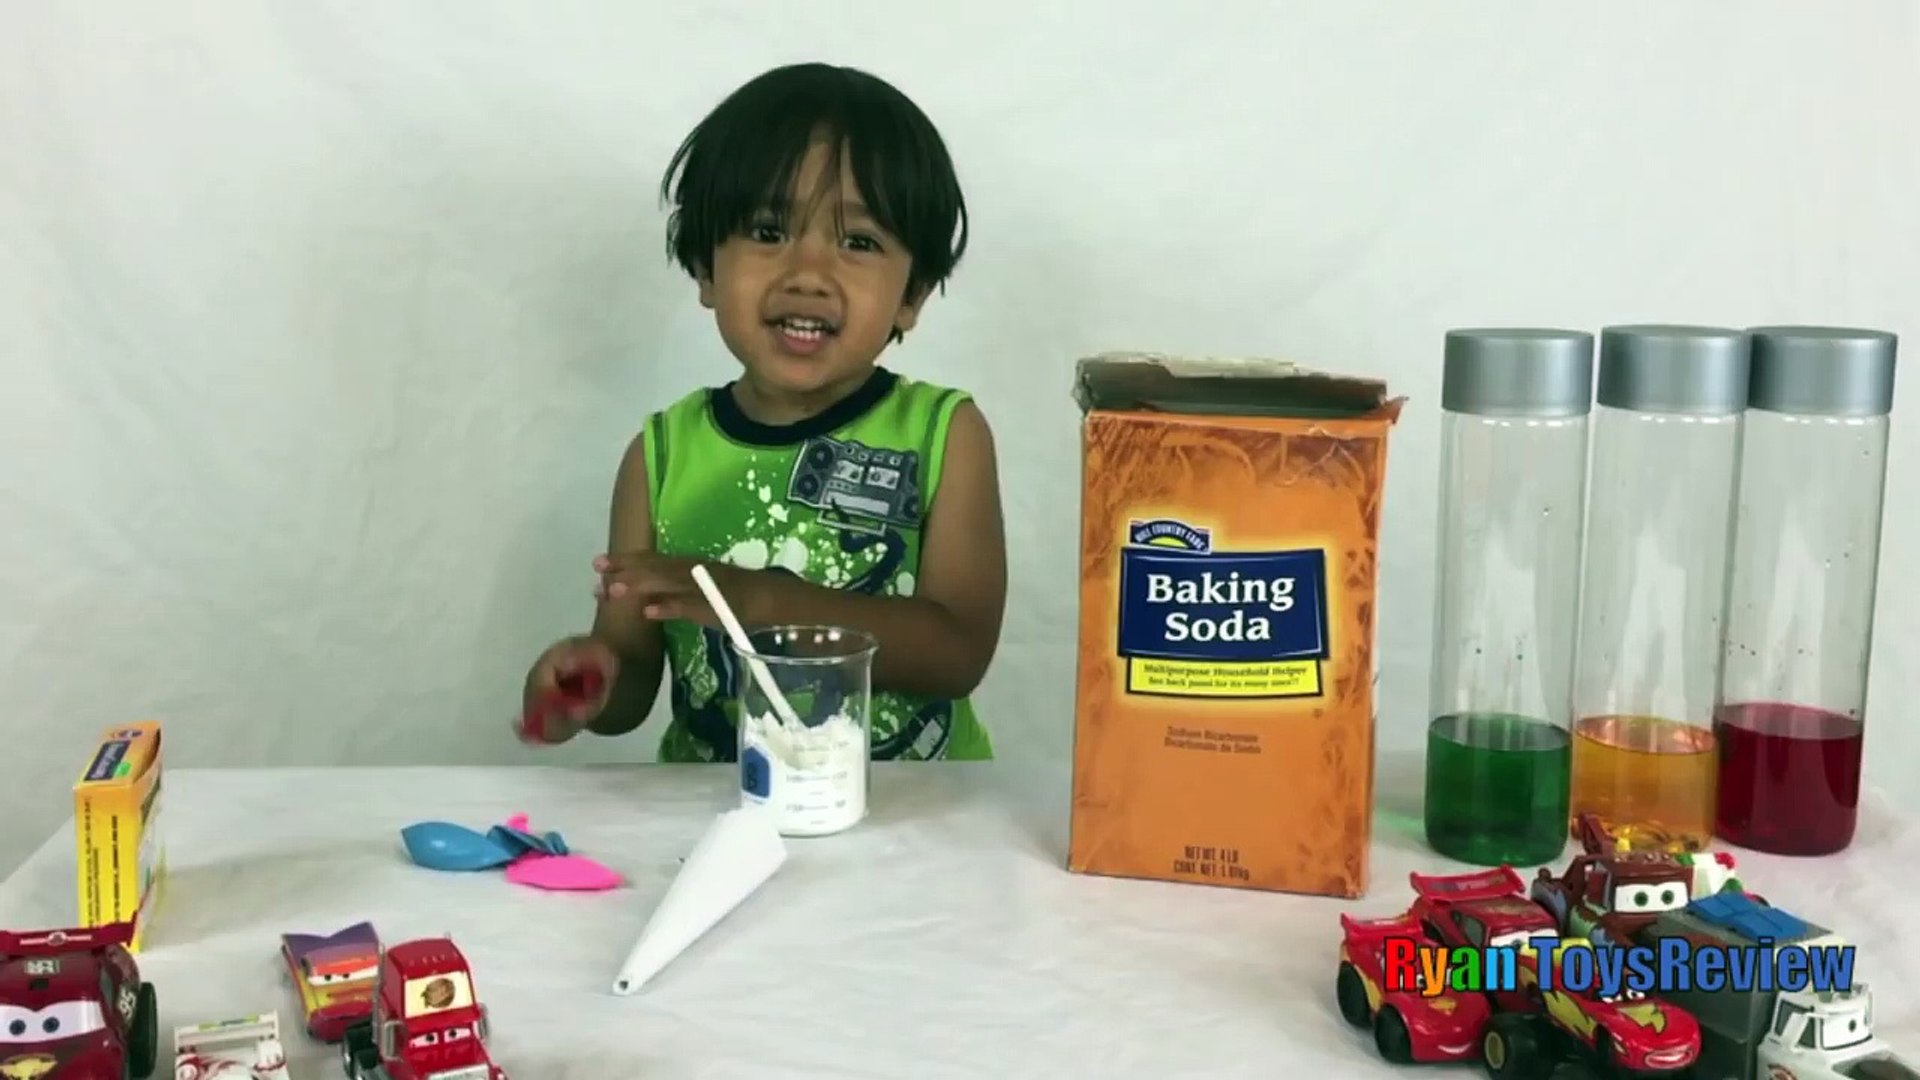 ryan toysreview experiments